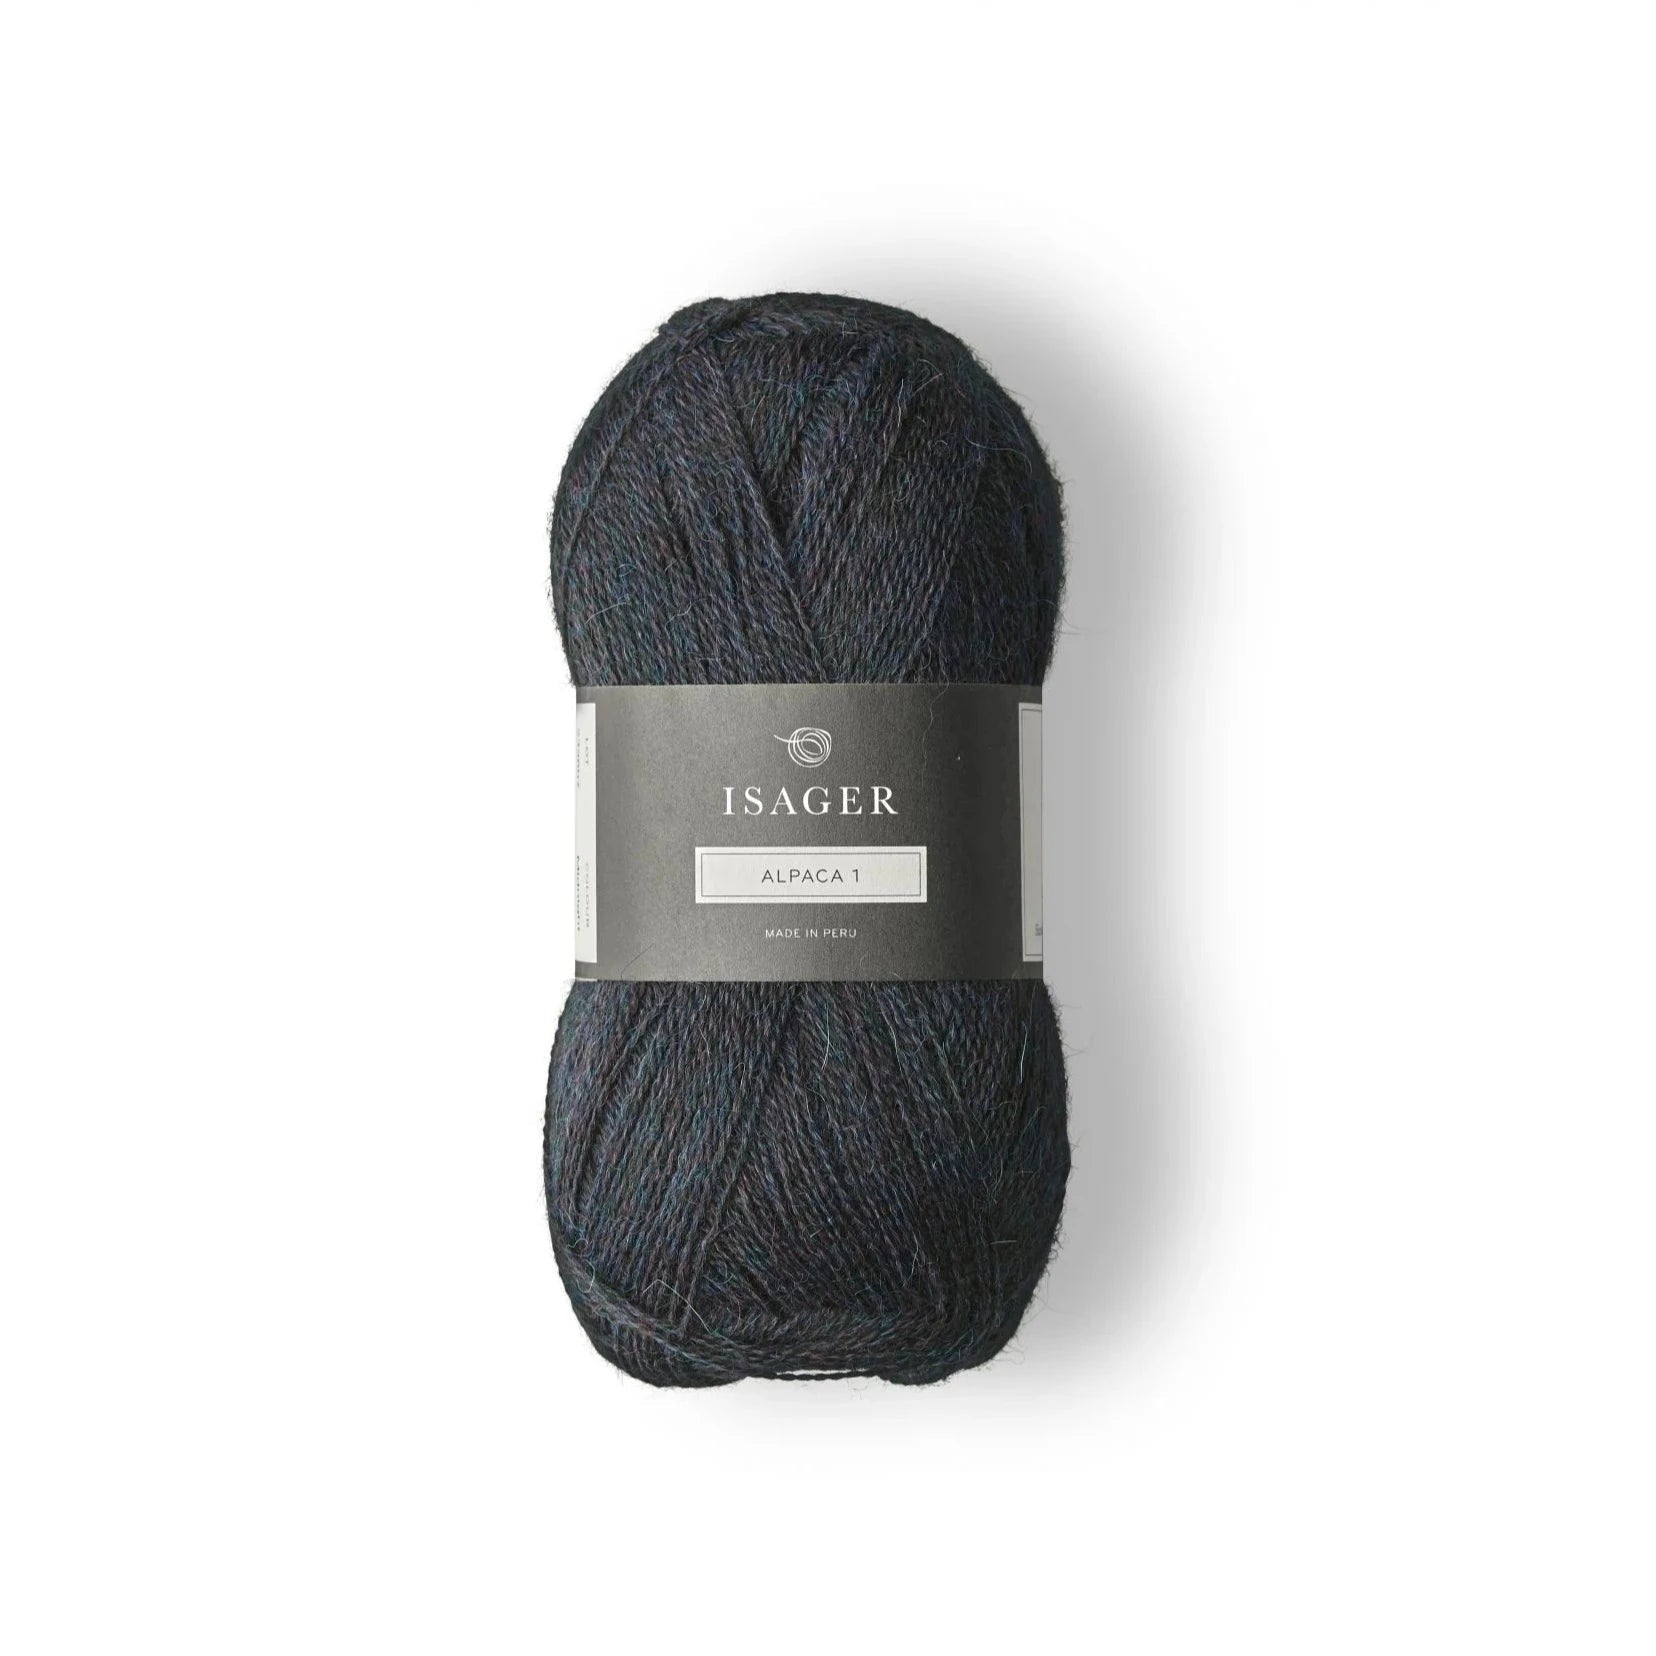 Isager Alpaca 1 - Isager - Midnight - The Little Yarn Store